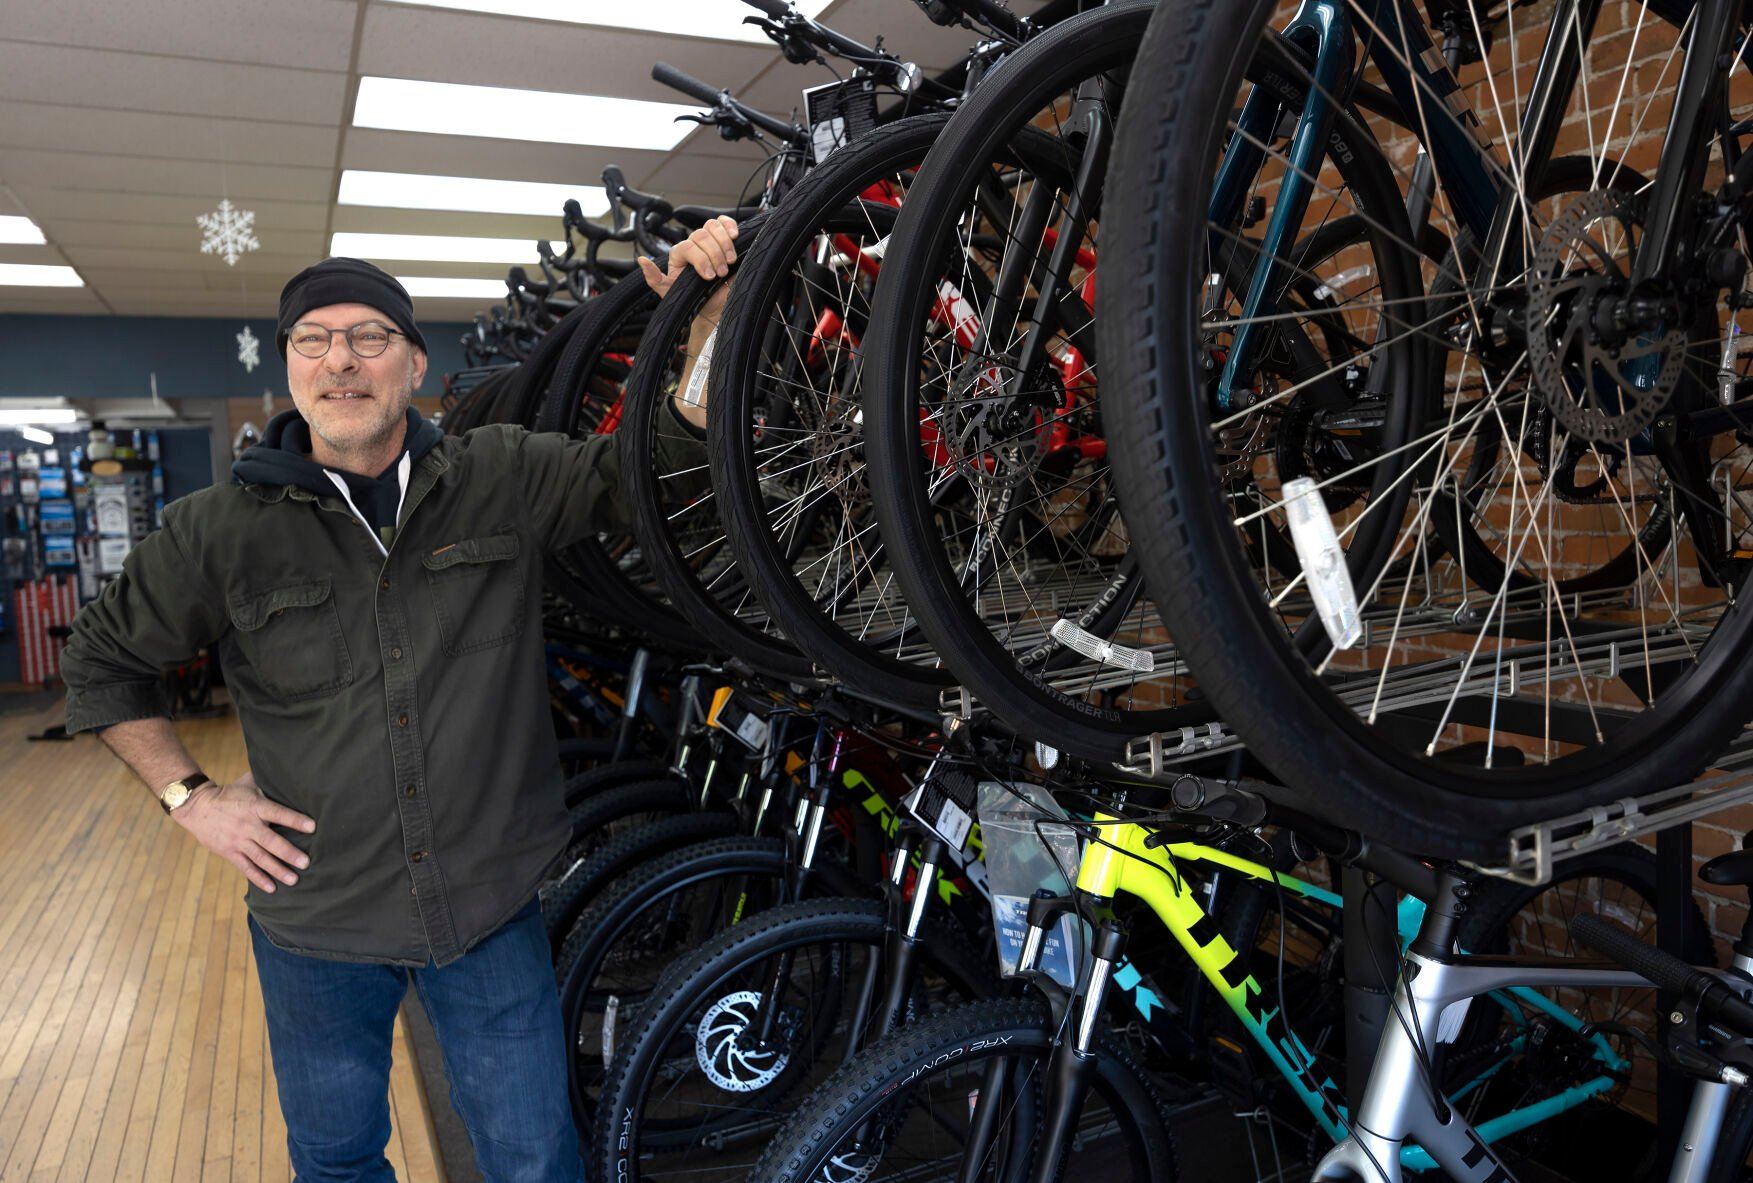 Longtime employee and future owner David Hartig stands in the current Bicycle World location on Central Avenue in Dubuque. The store is moving this spring after 50 years.    PHOTO CREDIT: Stephen Gassman